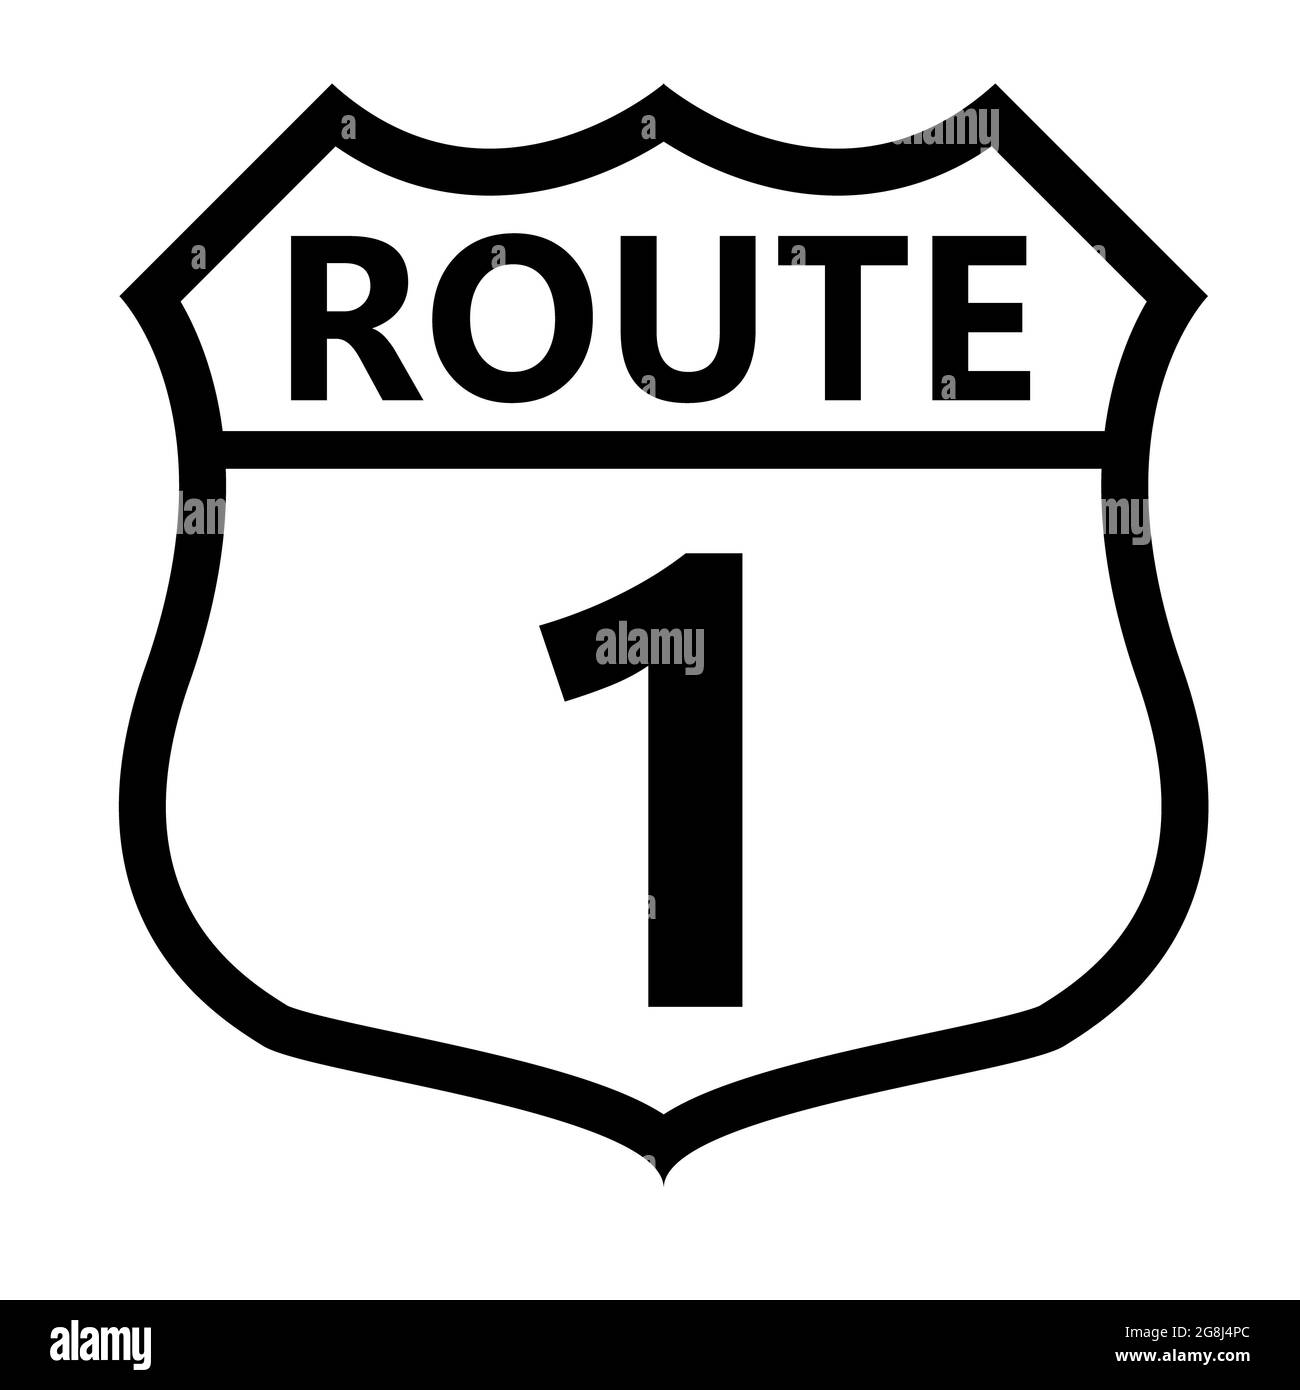 US route 1 sign. shield sign with route number and text symbol. United States Numbered Route. flat style. Stock Photo